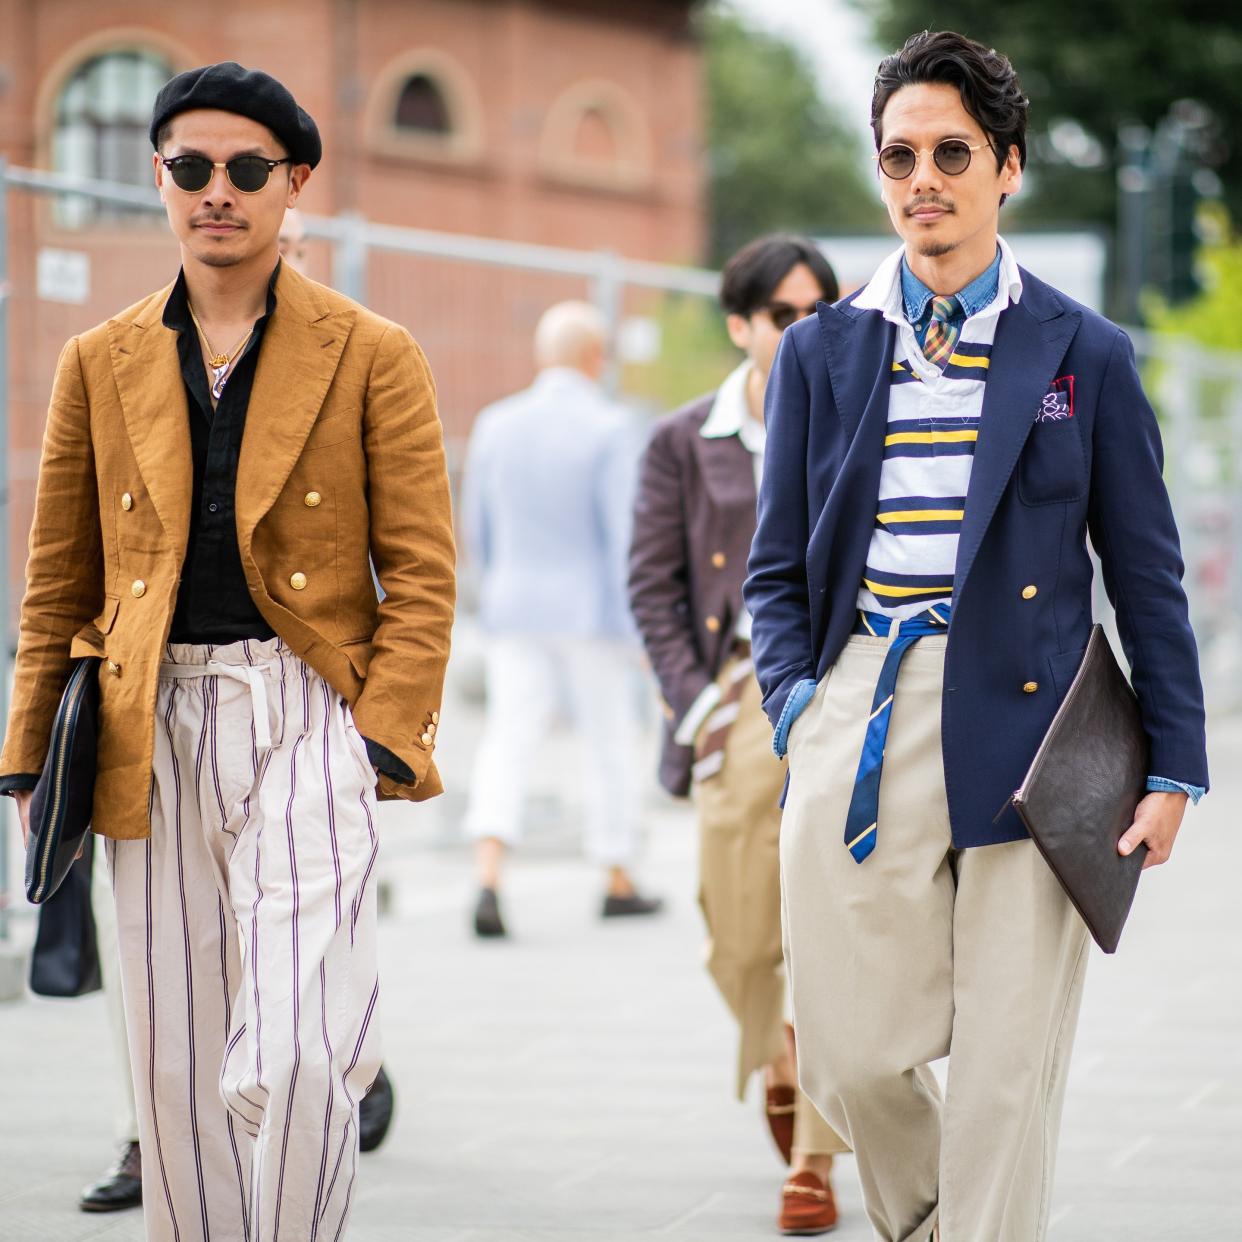 The shape of things to come: soft trouser shapes and modern suiting at June 2018 Pitti Uomo fair in Florence  - 2018 Christian Vierig